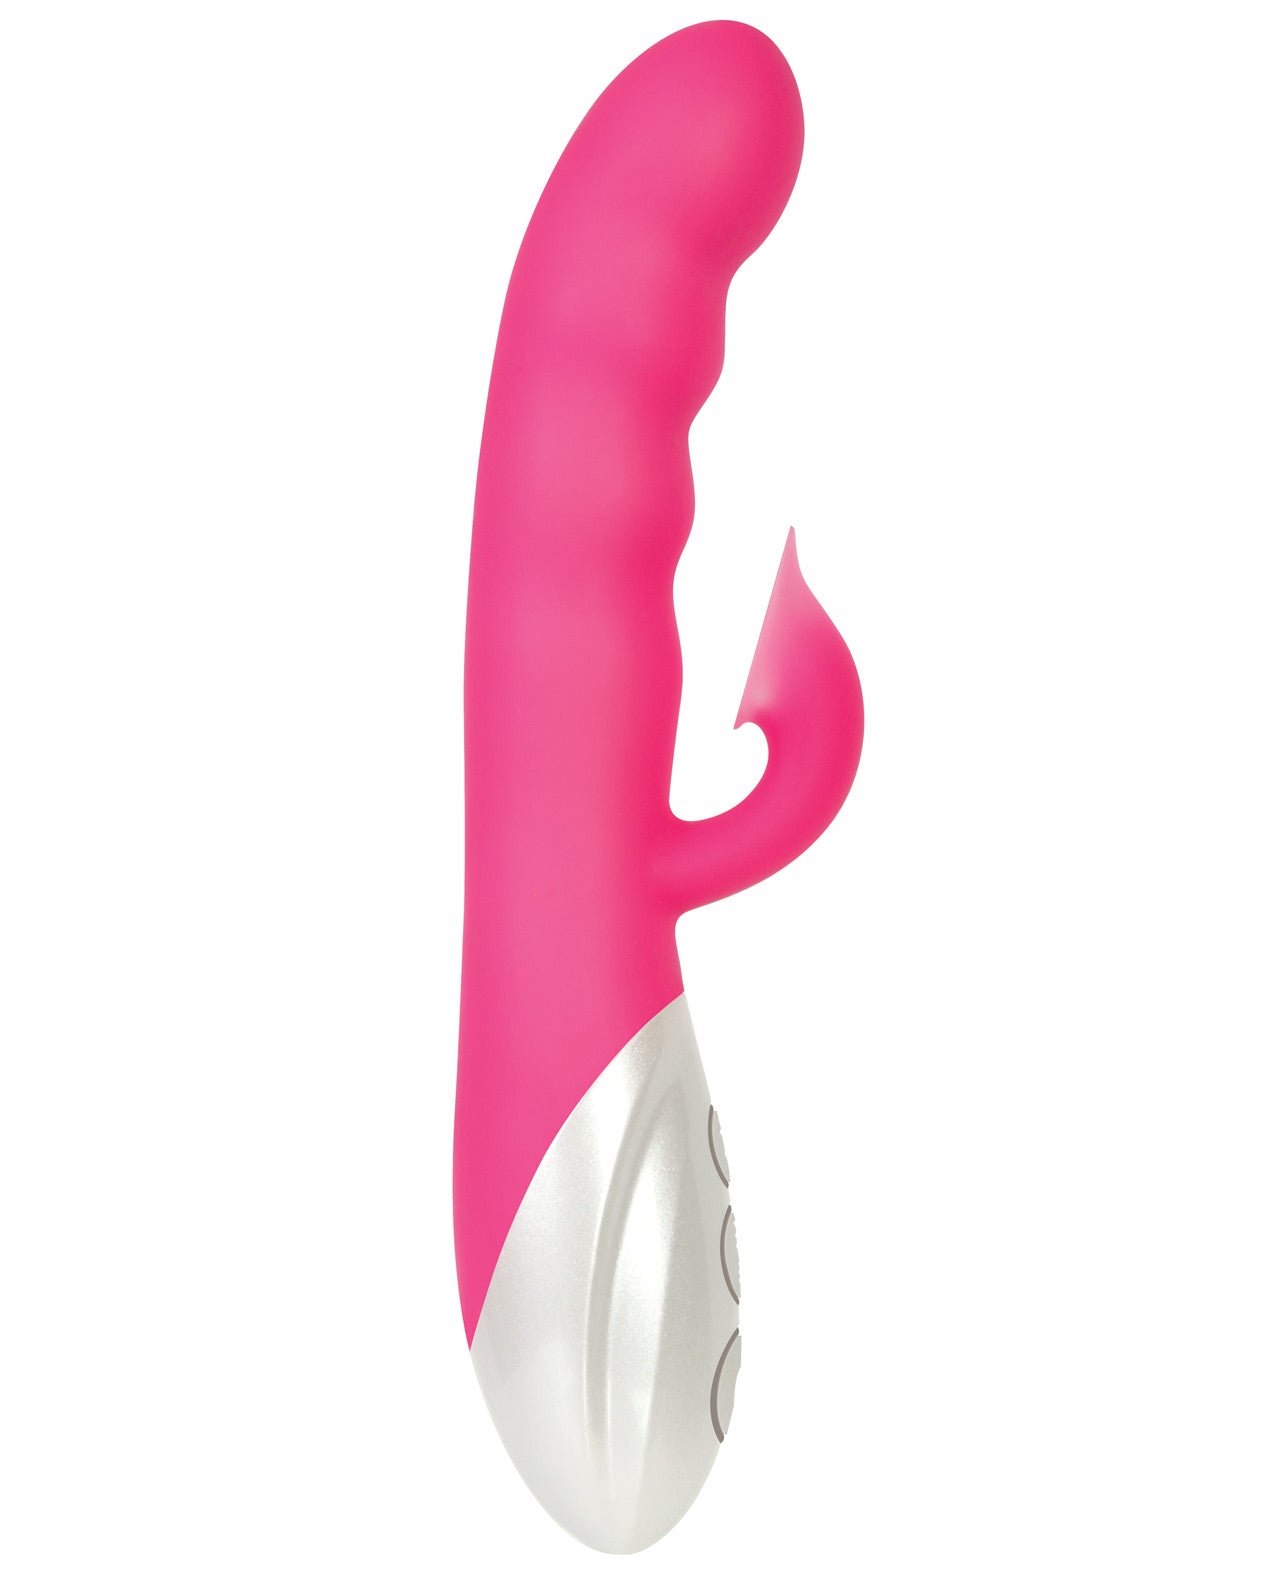 Evolved Instant O Rechargeable Vibrator - LUST Depot